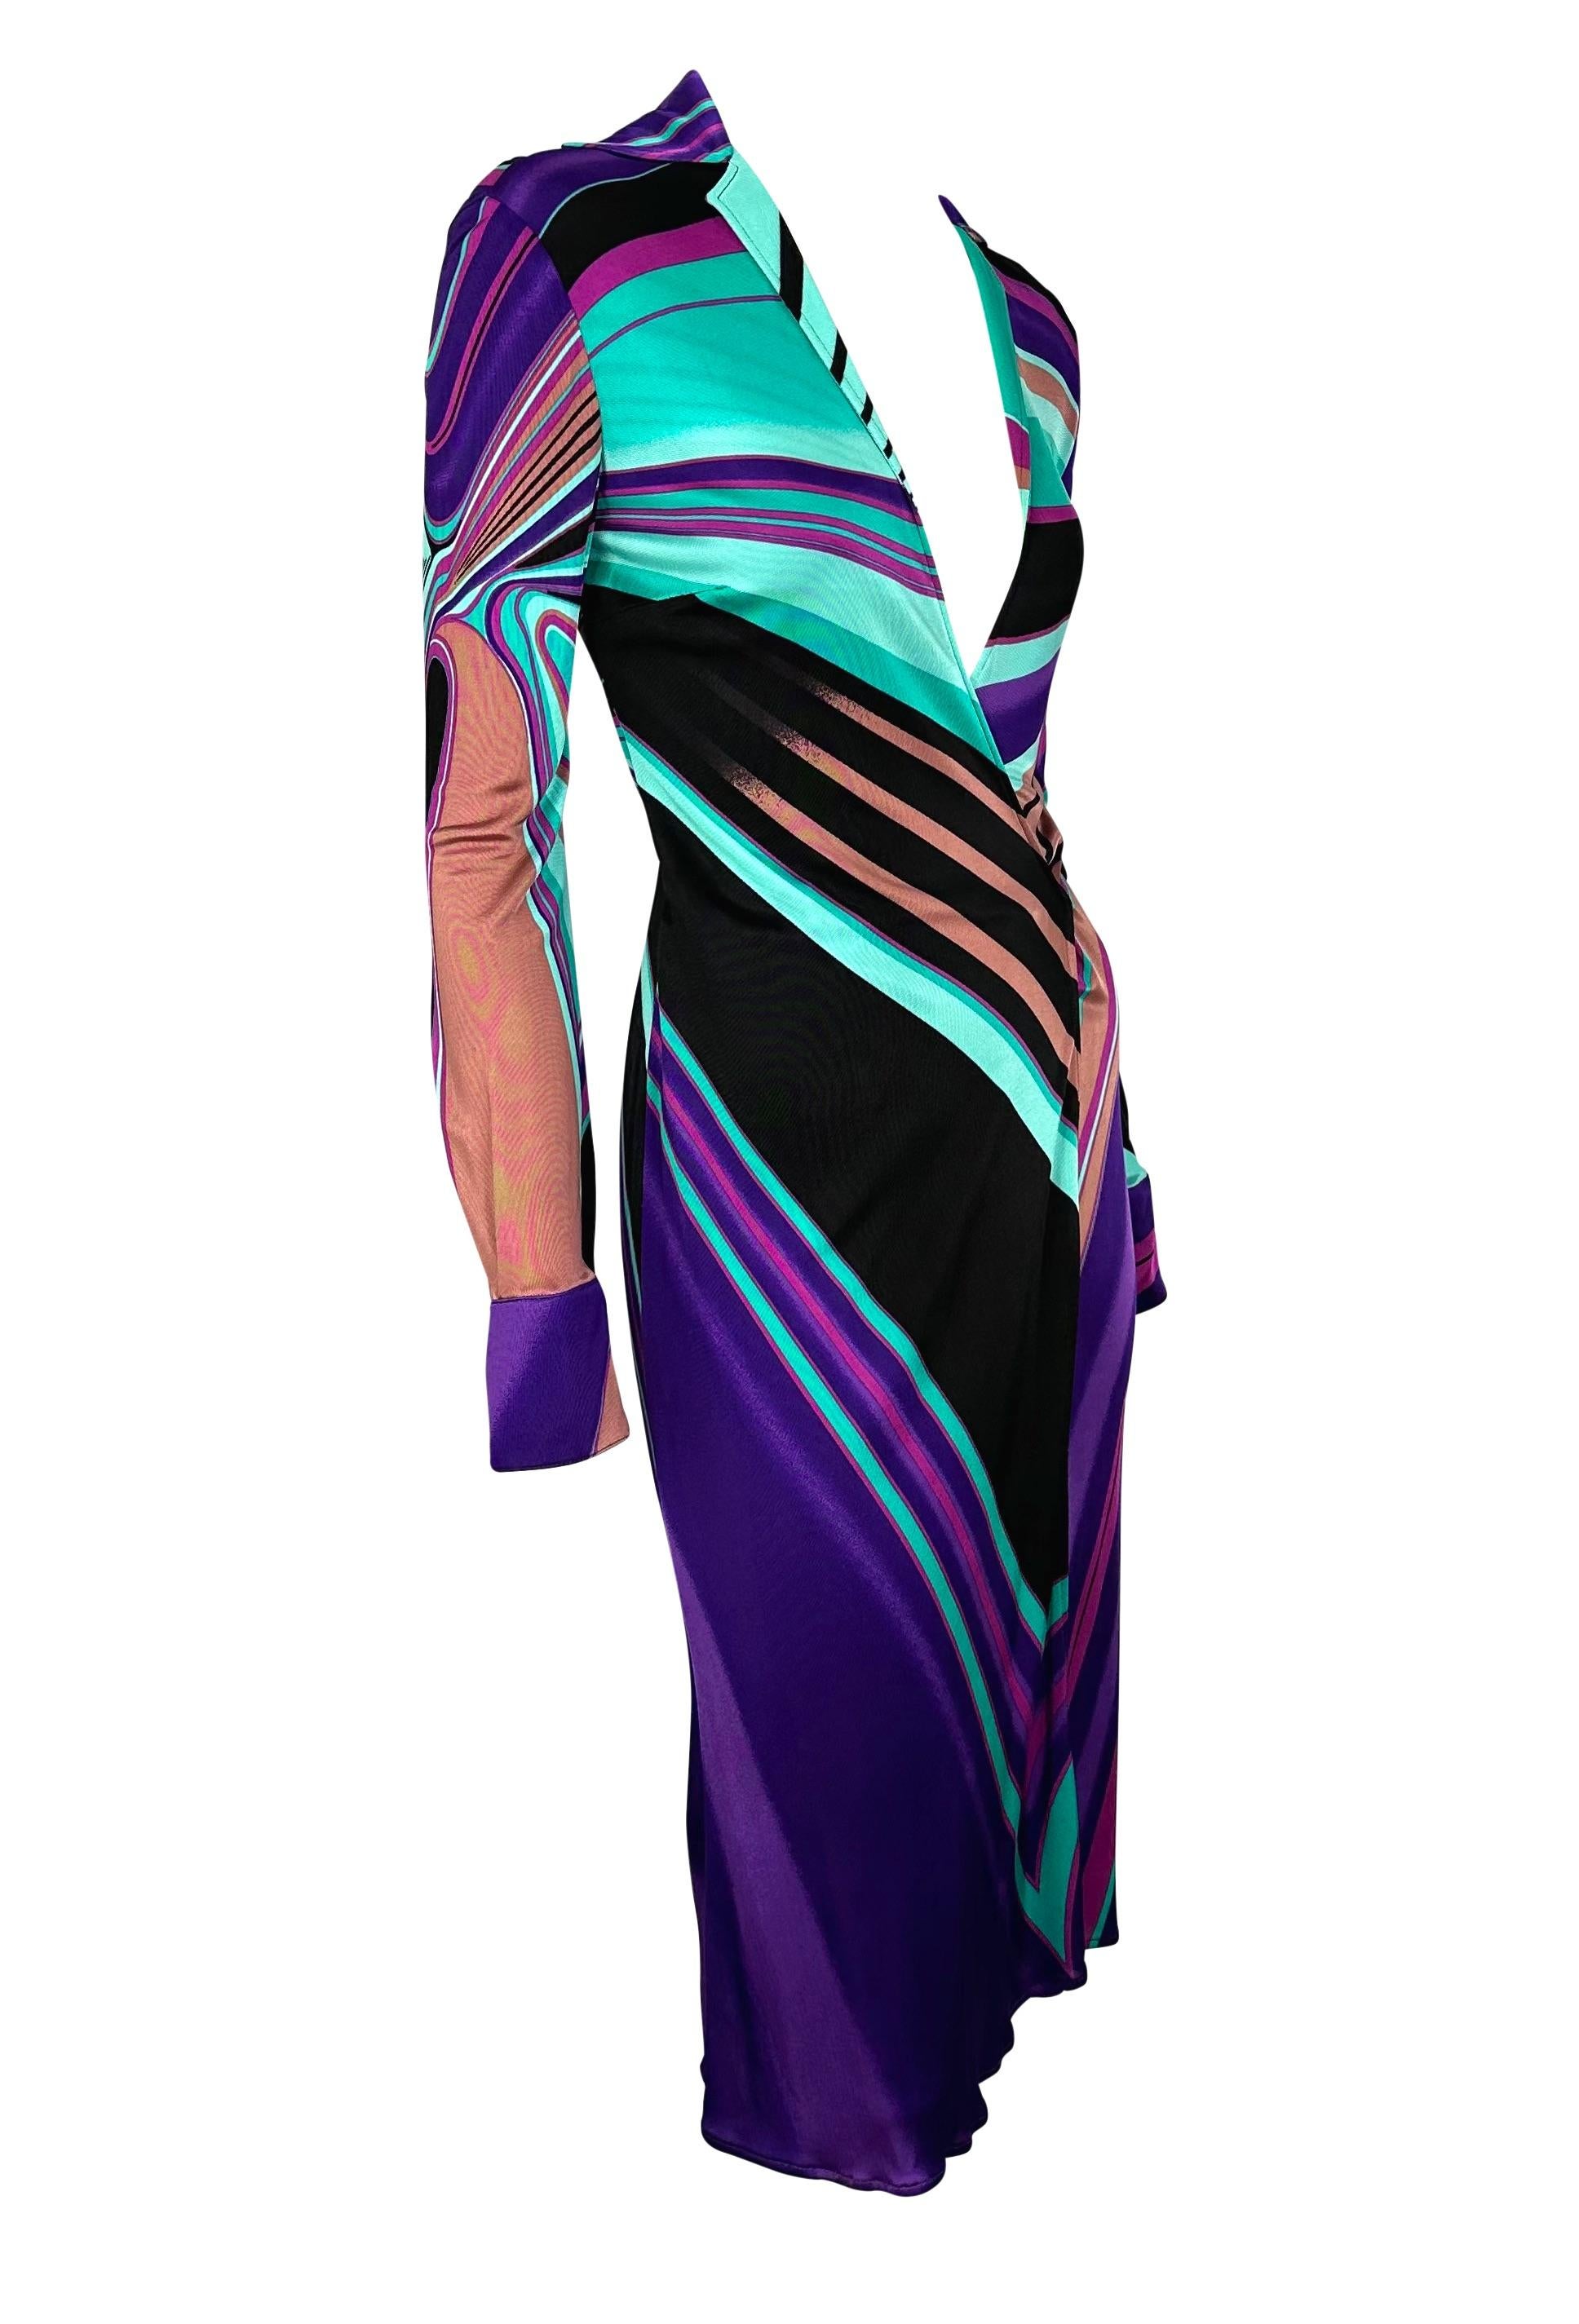 Black F/W 2000 Gianni Versace by Donatella Multicolor Abstract Plunge Stretch Dress  For Sale